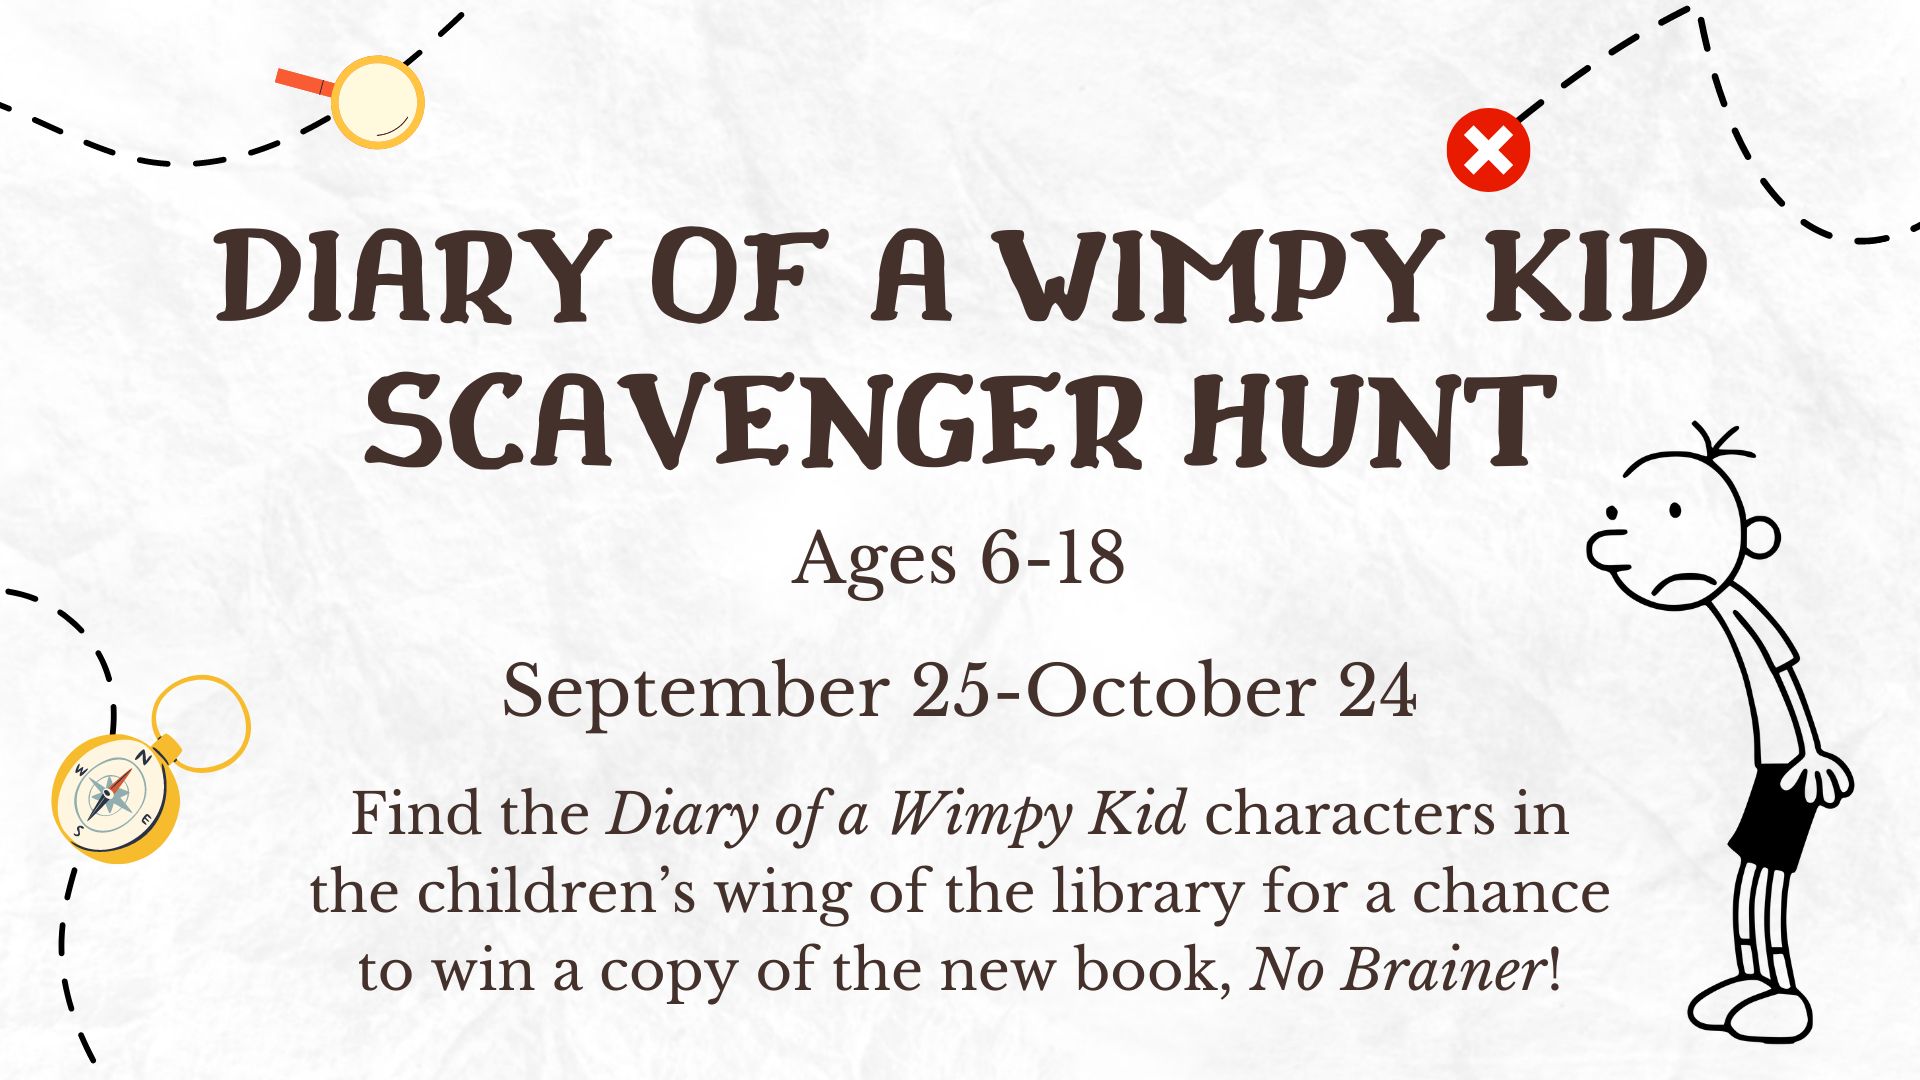 Diary of a Wimpy Kid Scavenger Hunt